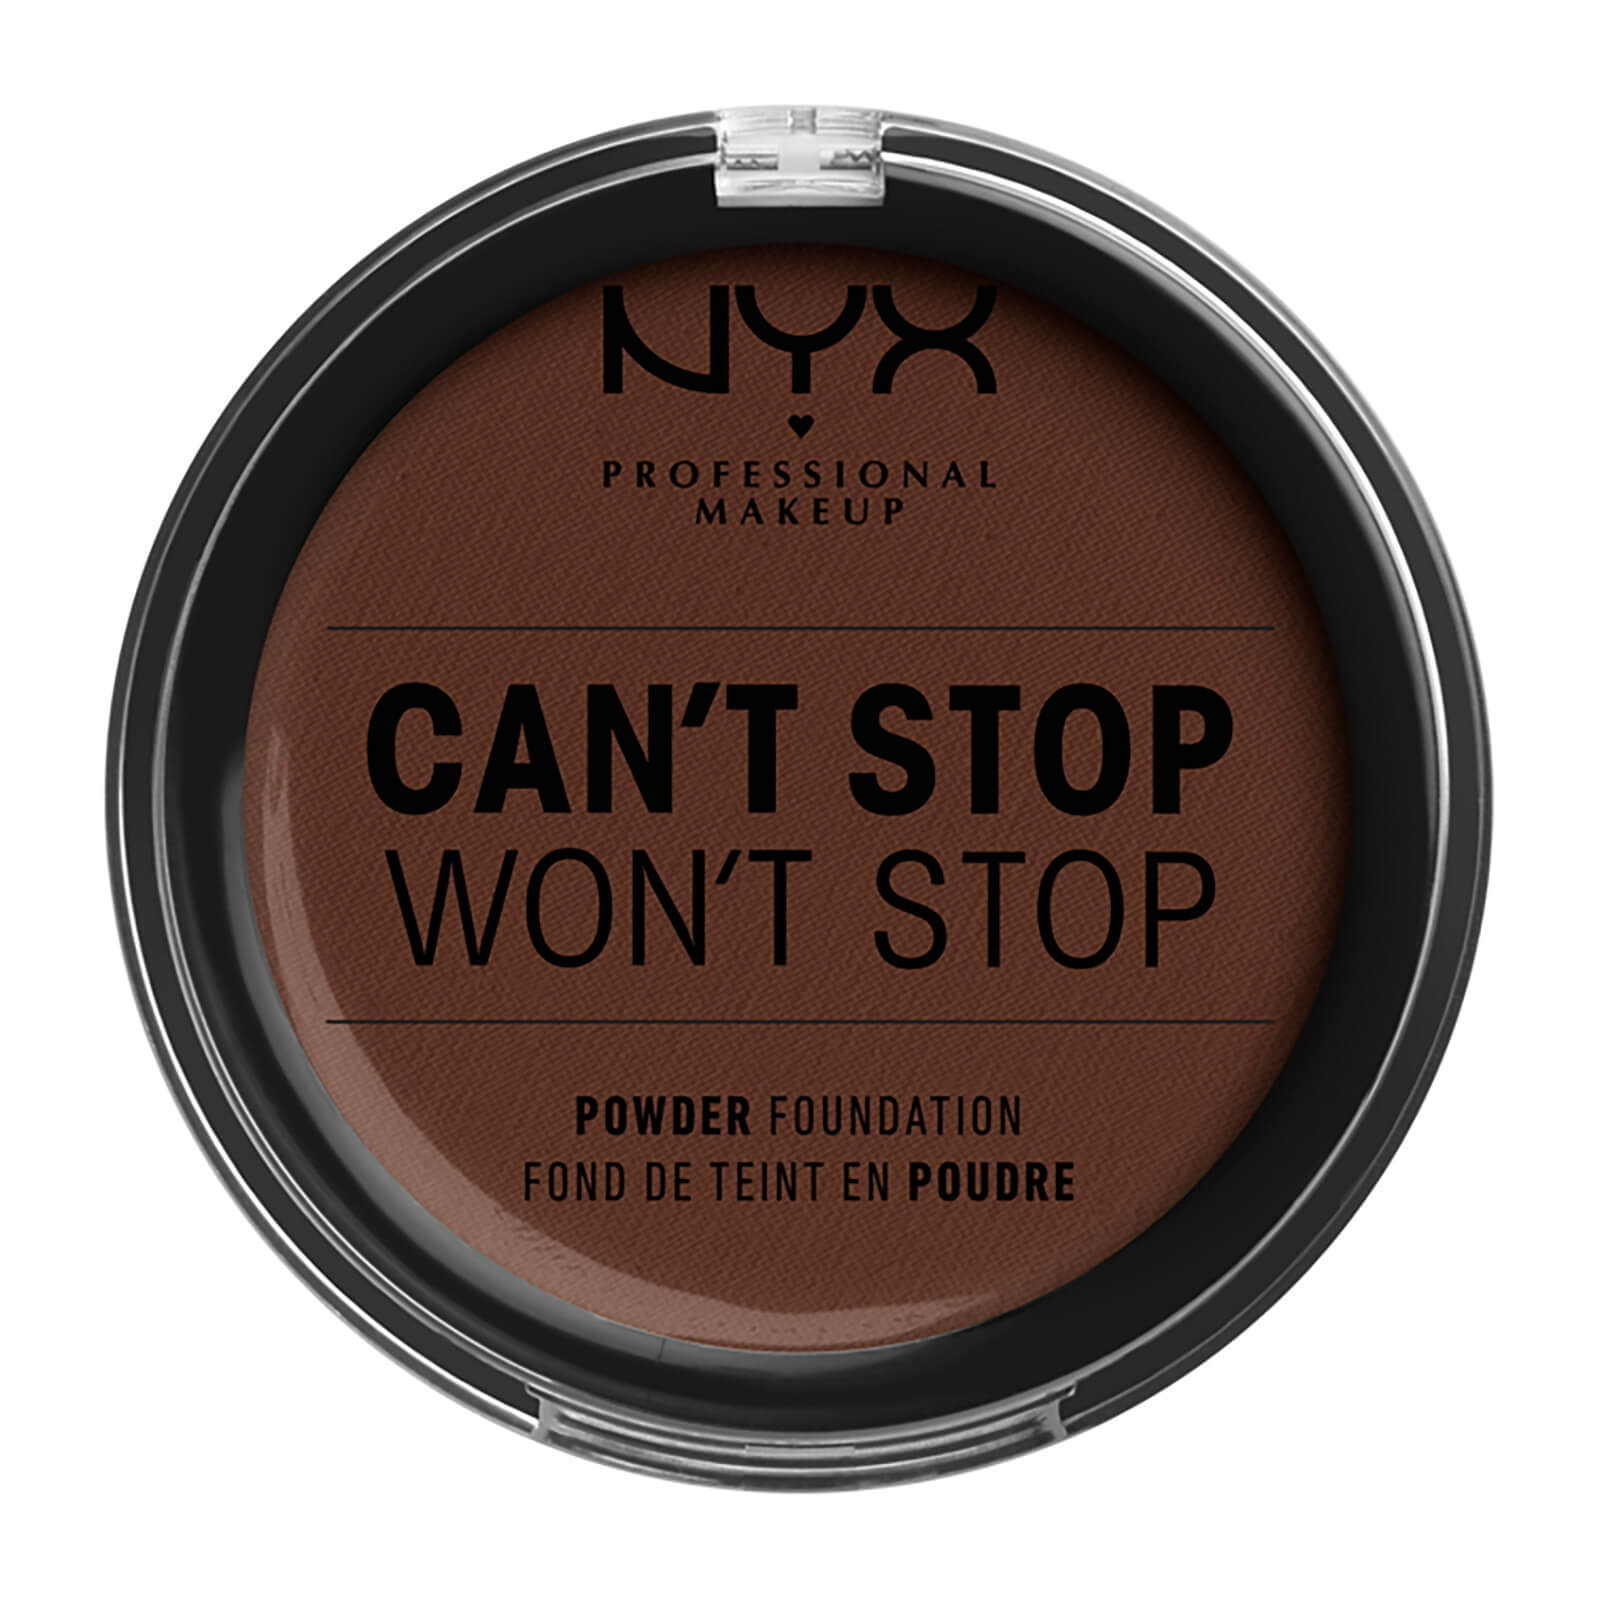 NYX Professional Makeup Can't Stop Won't Stop Powder Foundation (Various Shades) - Deep Espresso